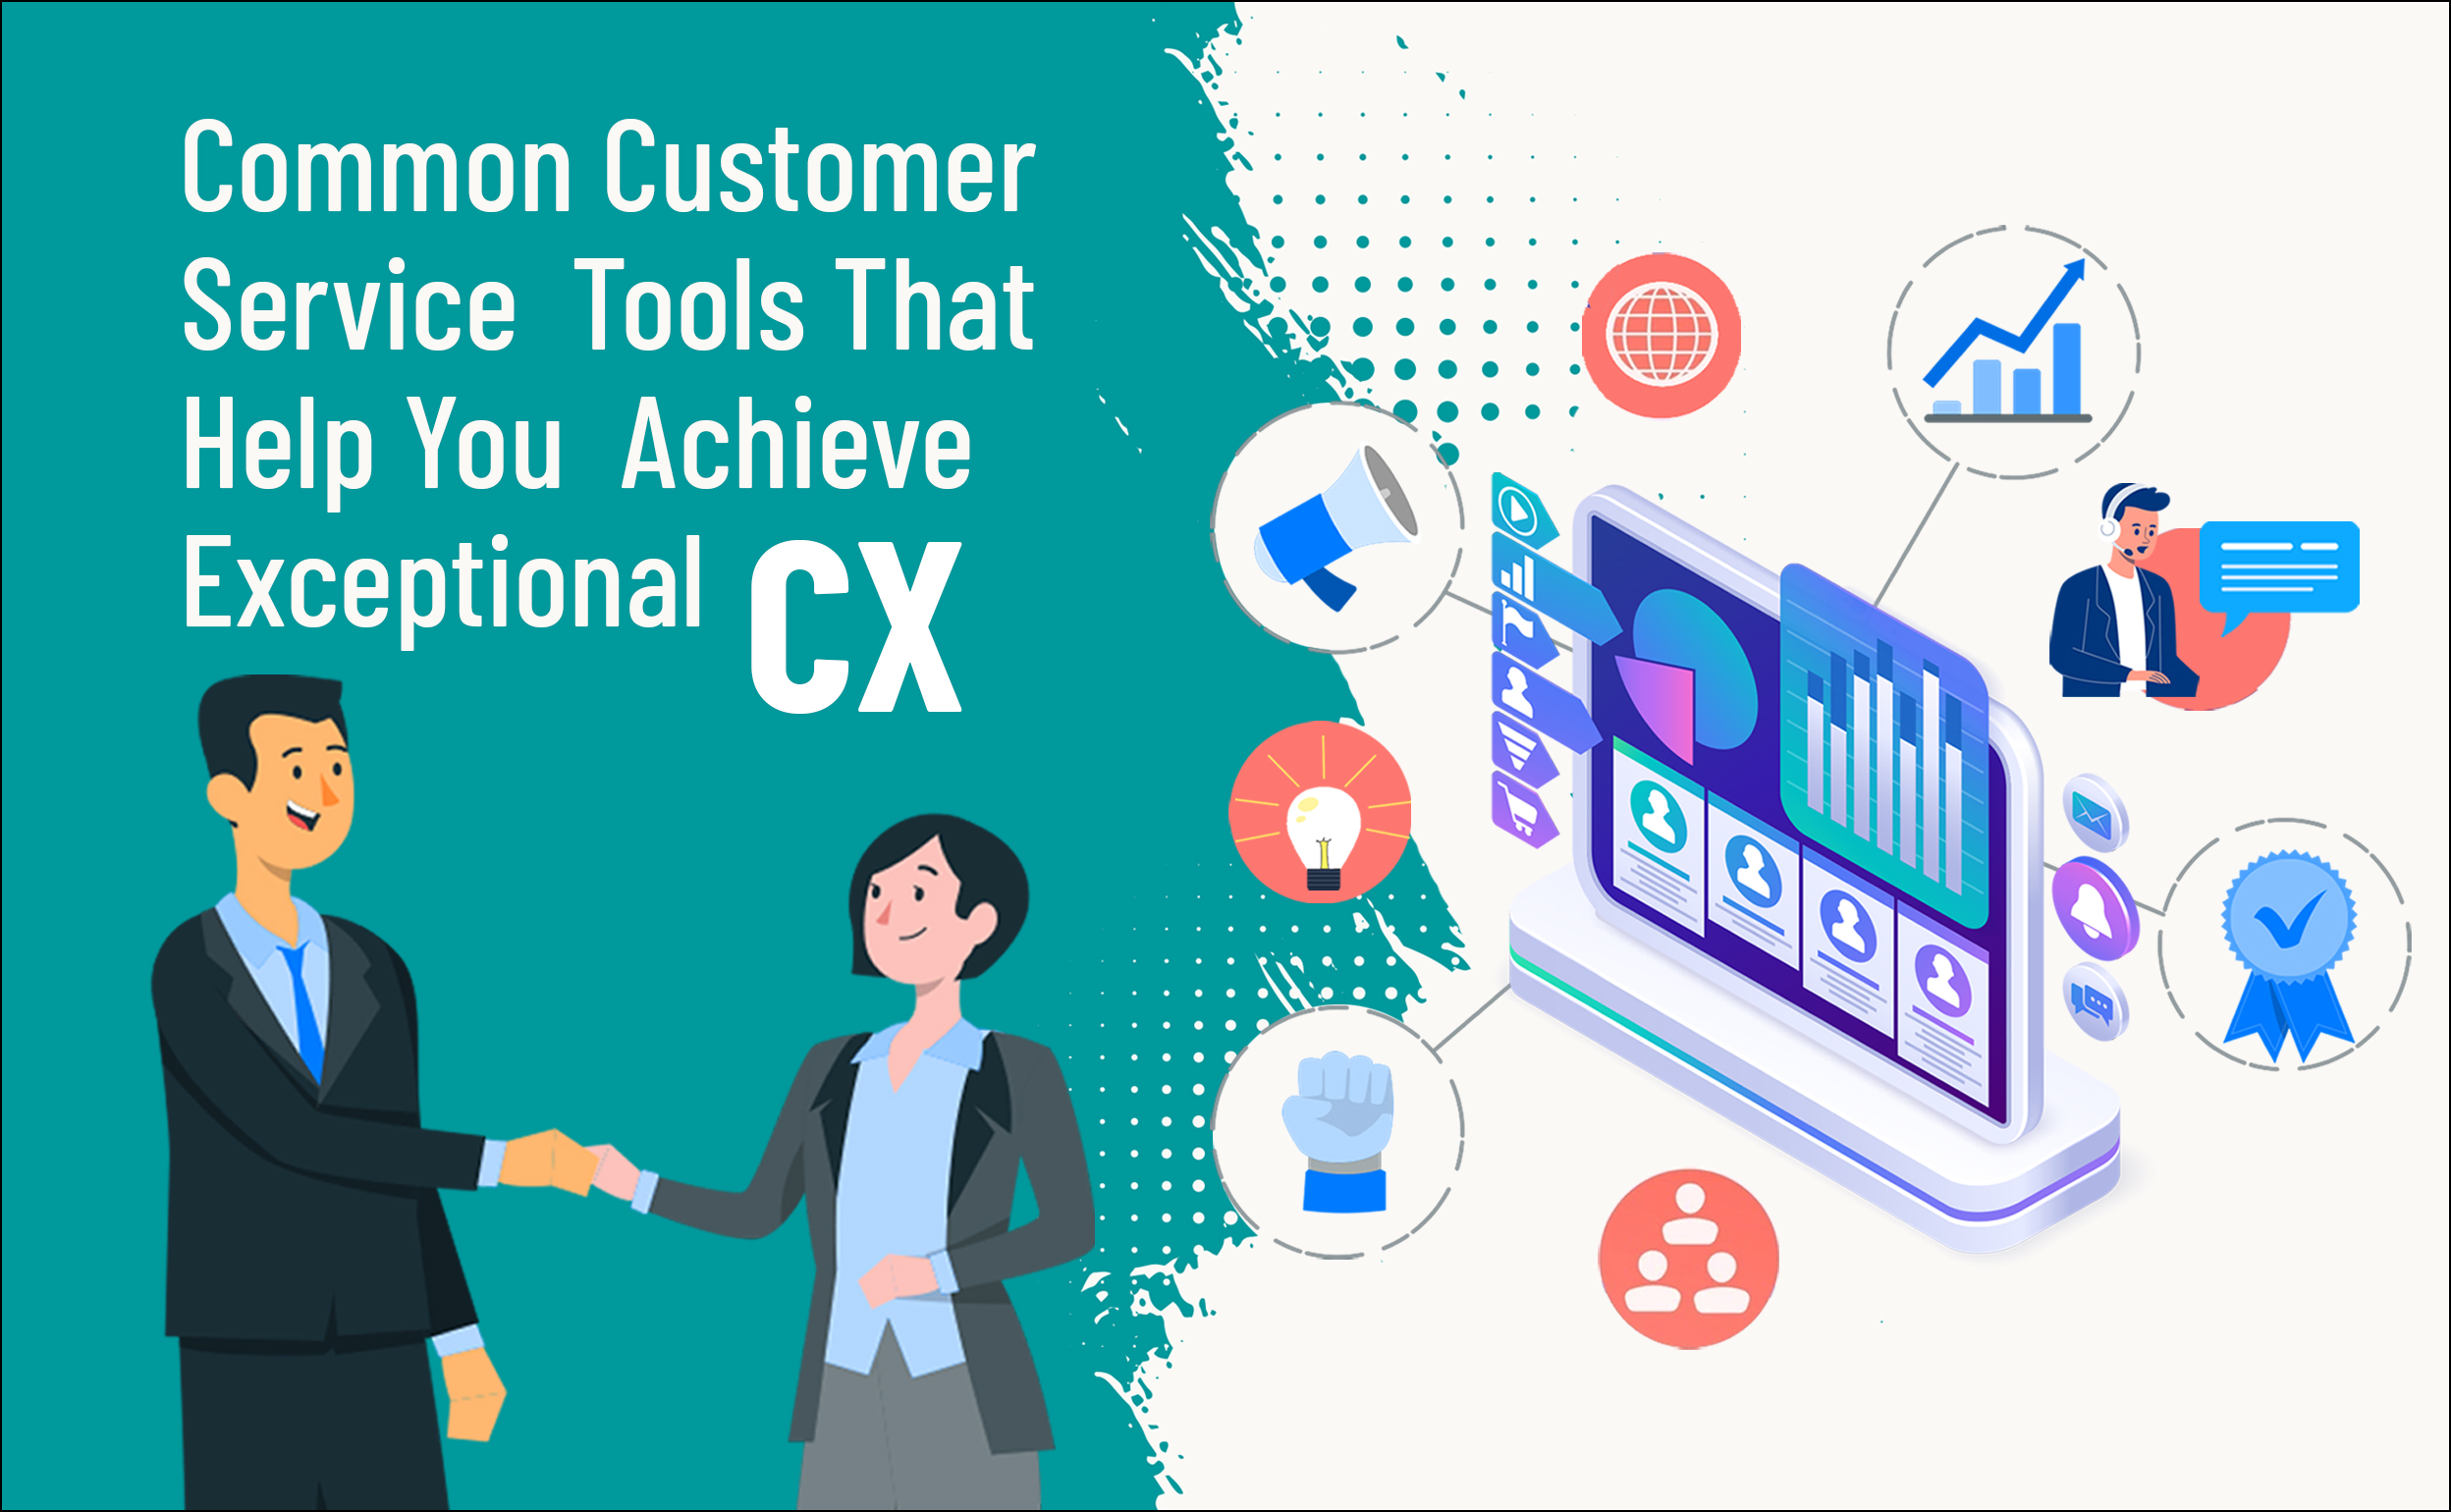 Common Customer Service Tools That Help You Achieve Exceptional CX